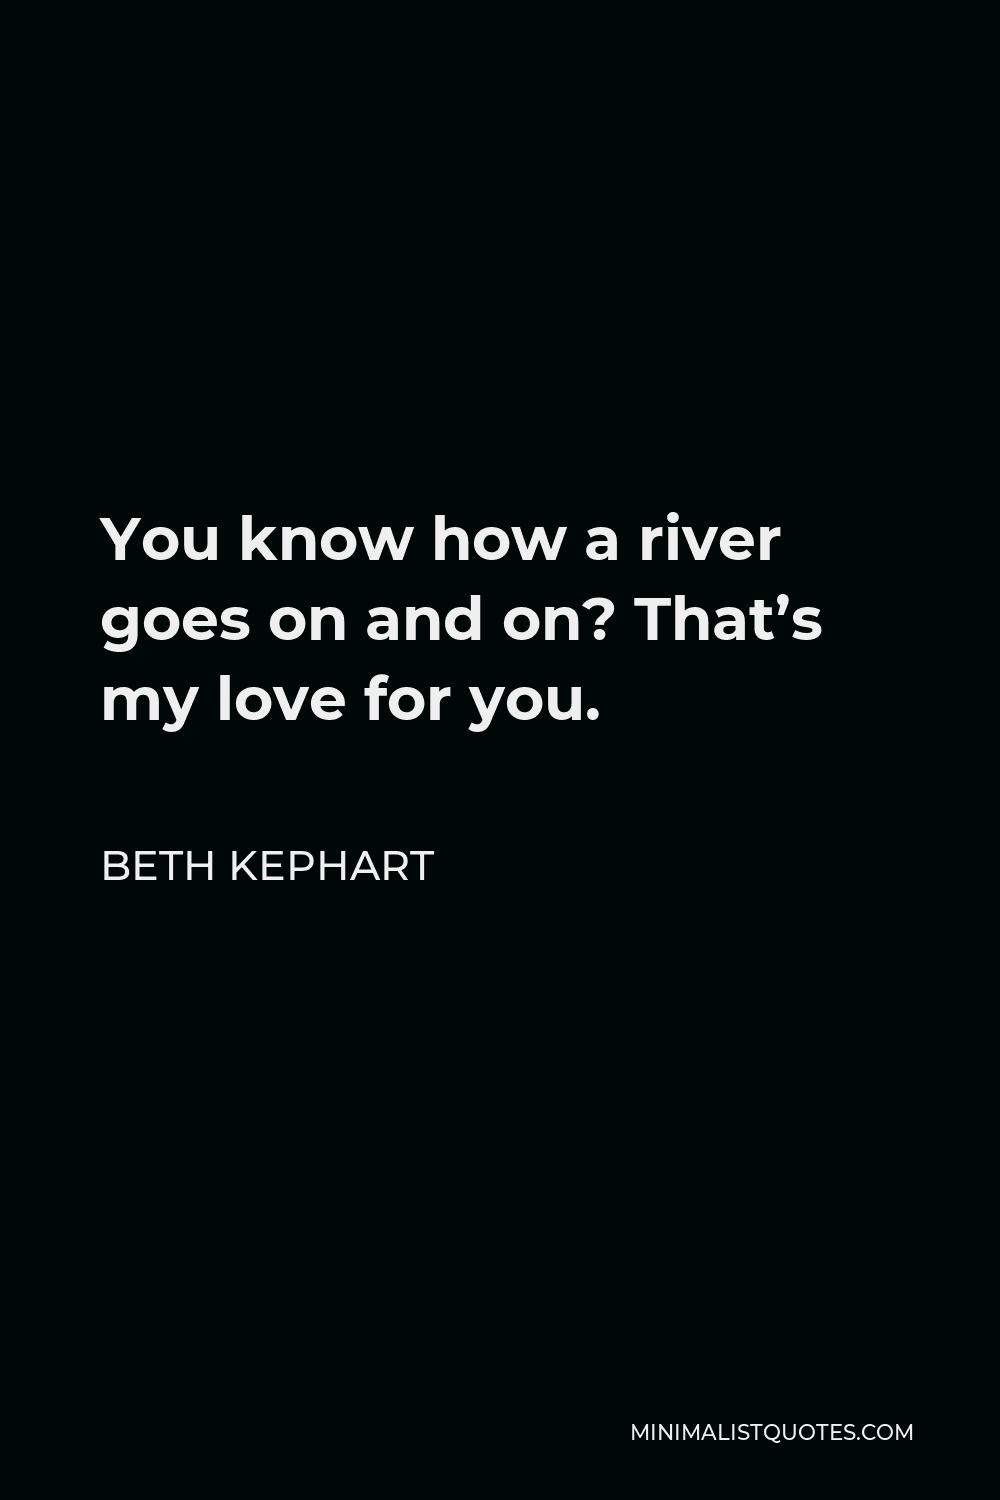 Beth Kephart Quote - You know how a river goes on and on? That’s my love for you.